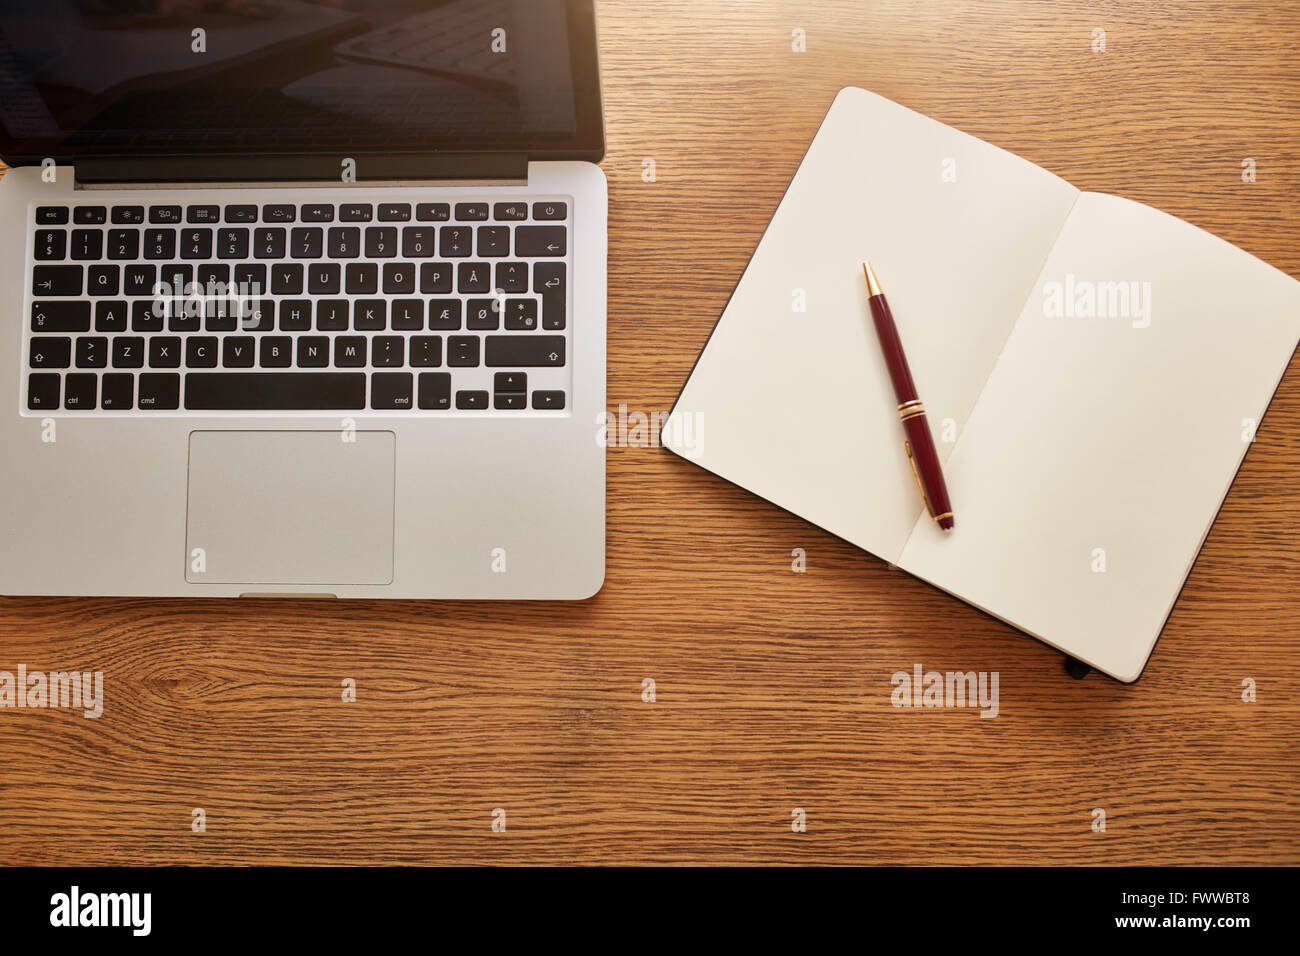 Top view shot of a laptop with diary and pen and on wooden table. Overhead view of working desk. Stock Photo